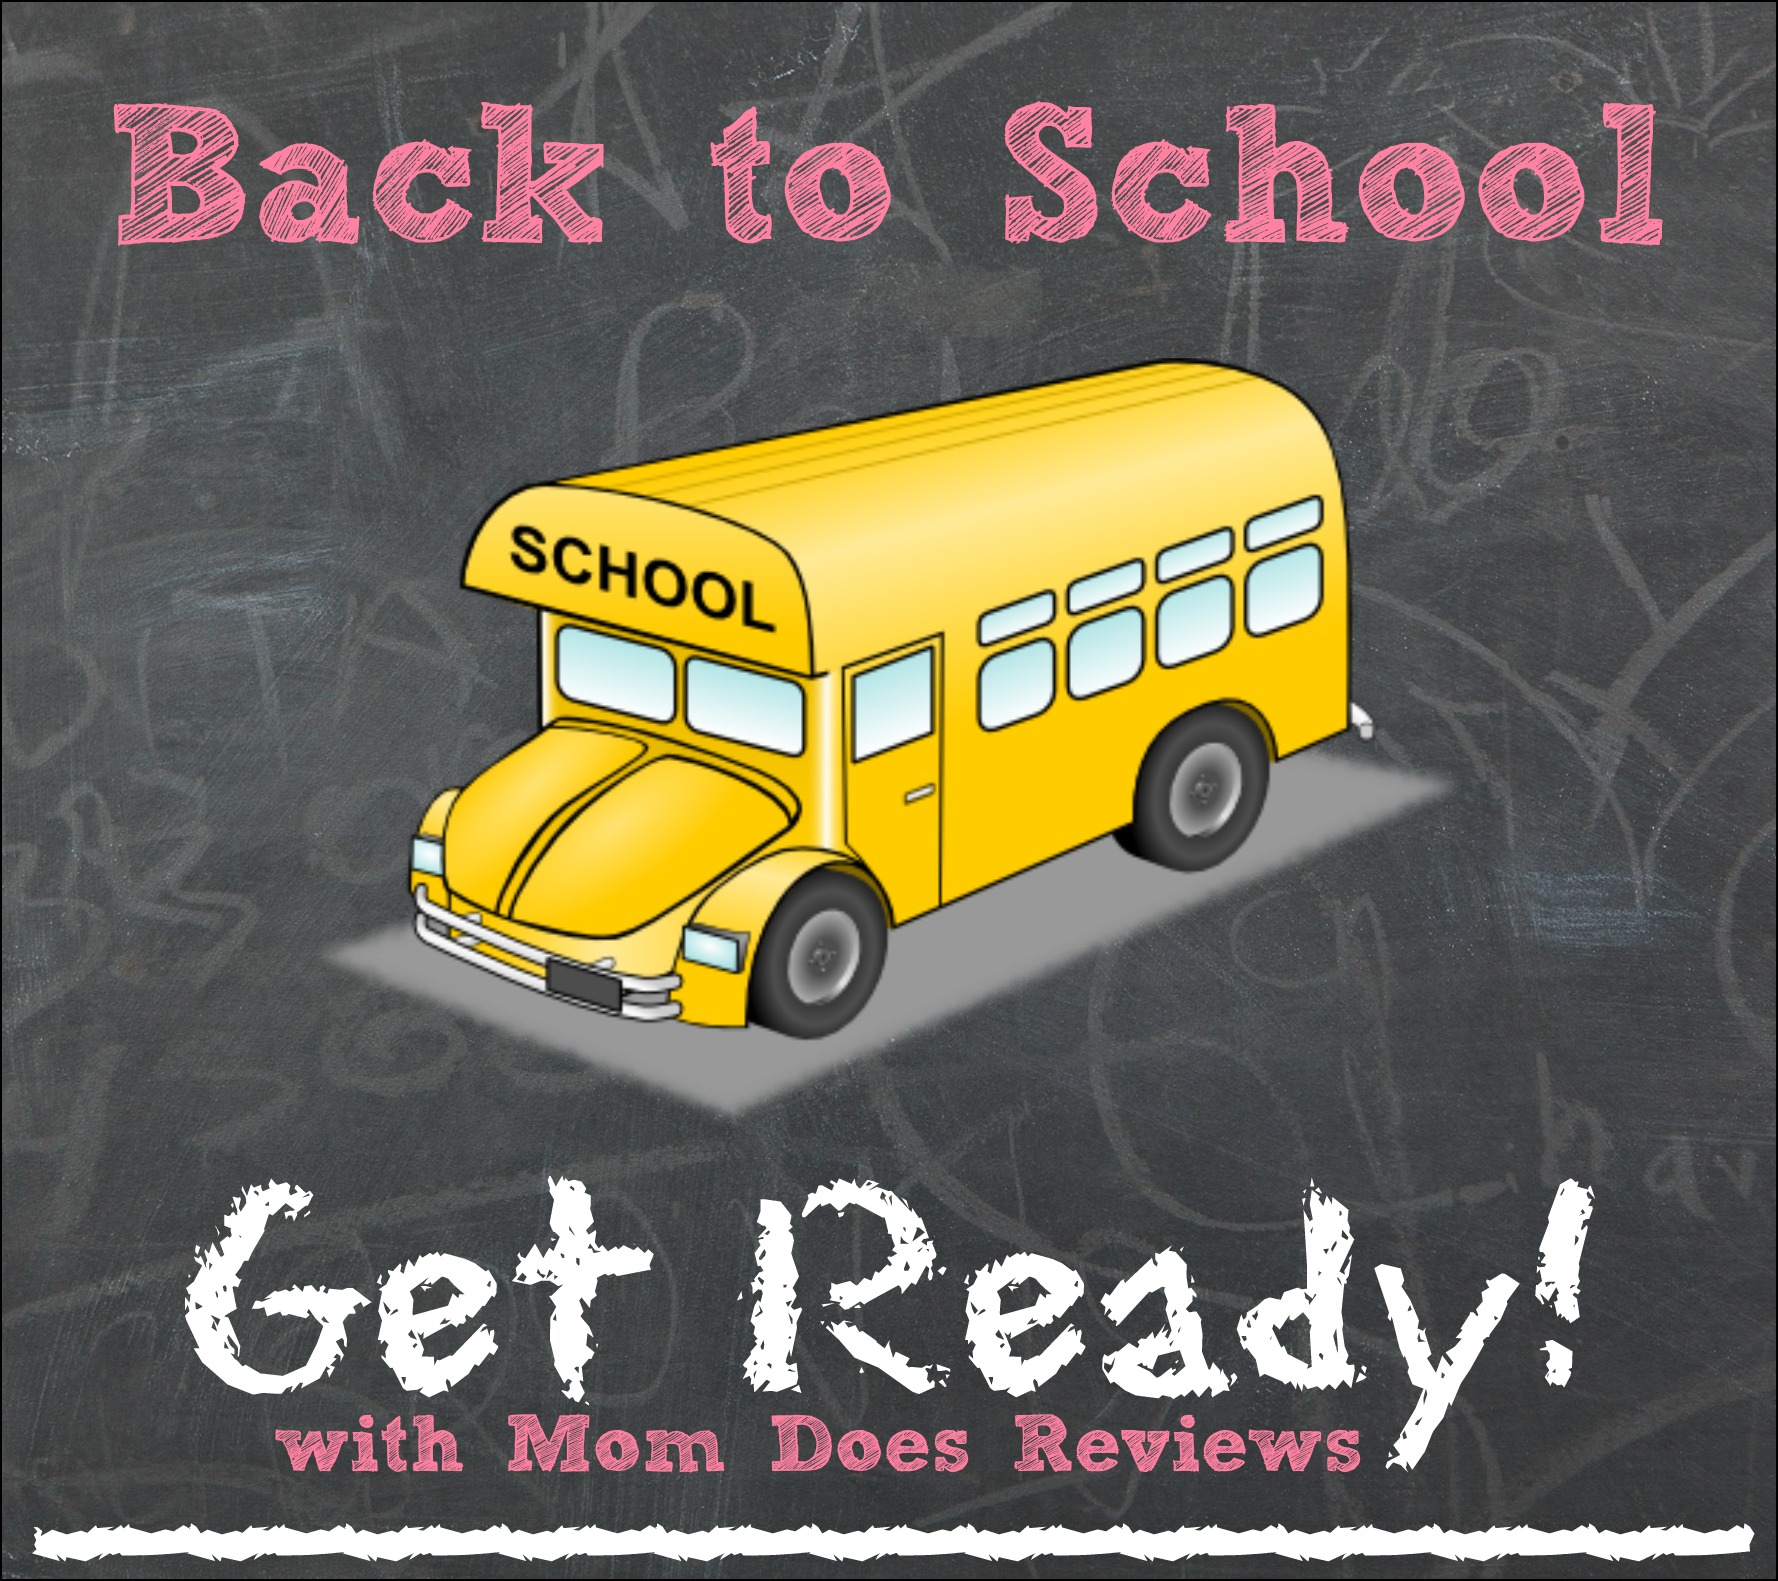 Back to School with Mom Does Reviews